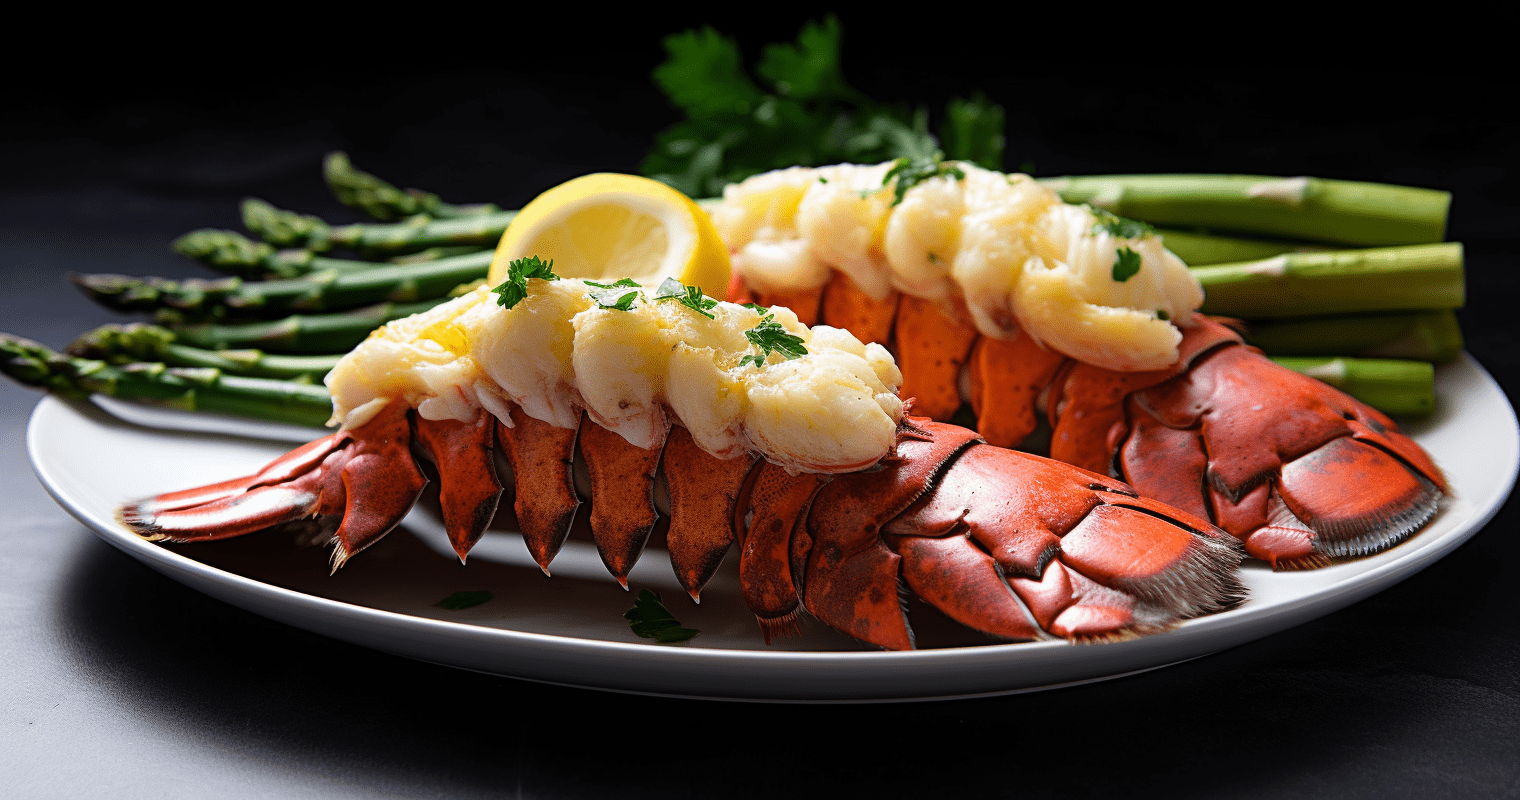 Lobster Tails with Garlic Butter Final Dish